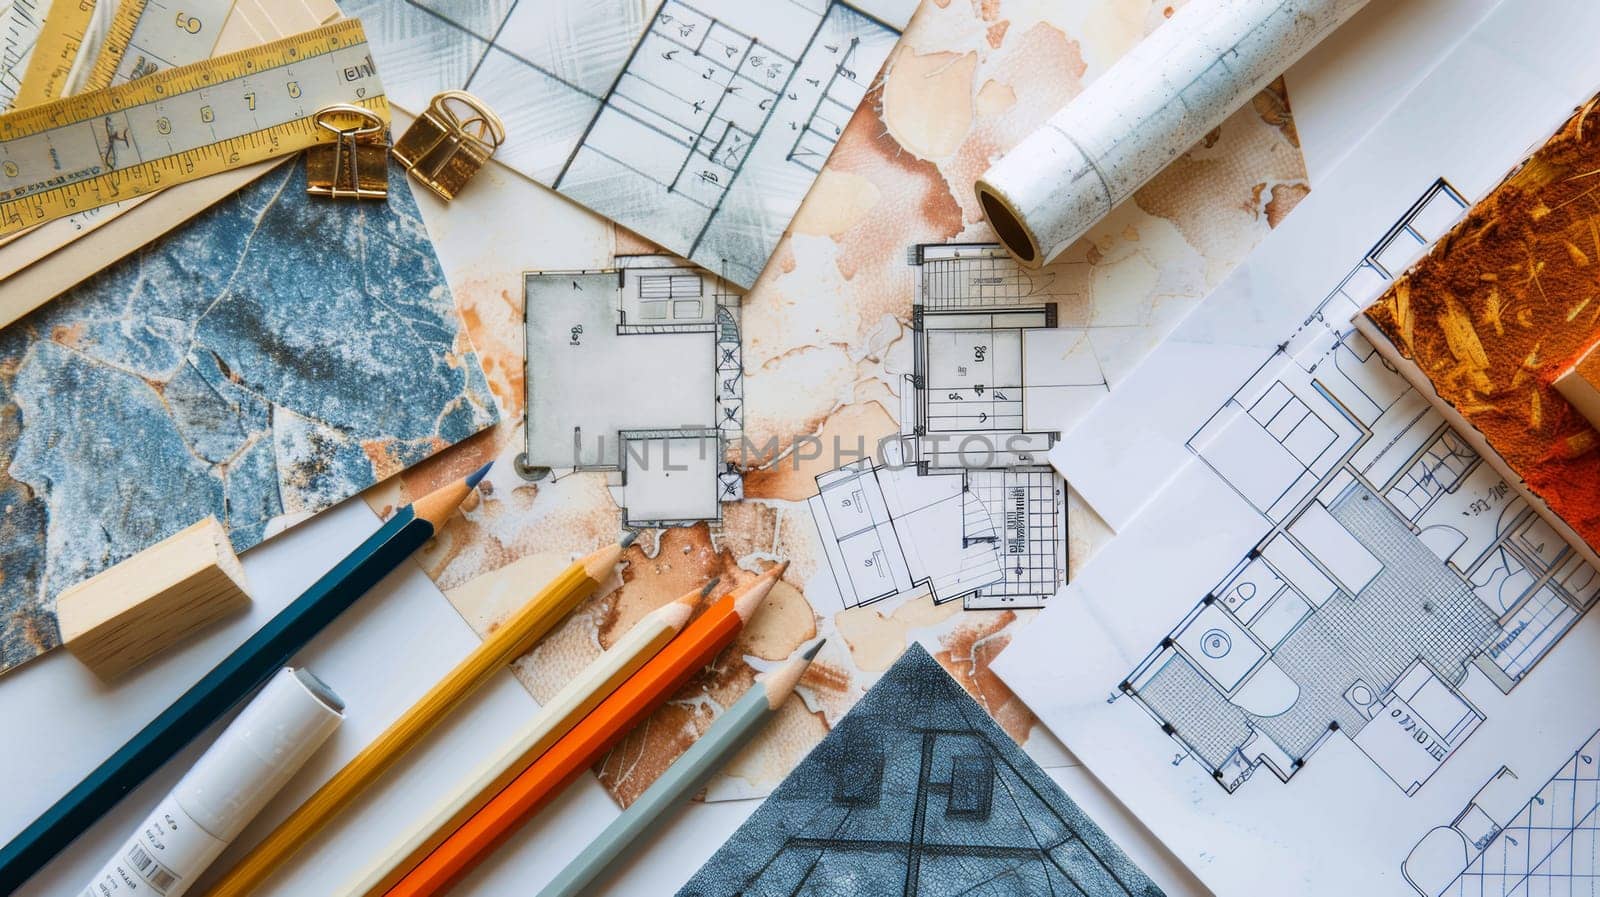 A table covered in numerous architectural drawings and pencils, showcasing a blend of creativity and precision in design and planning.